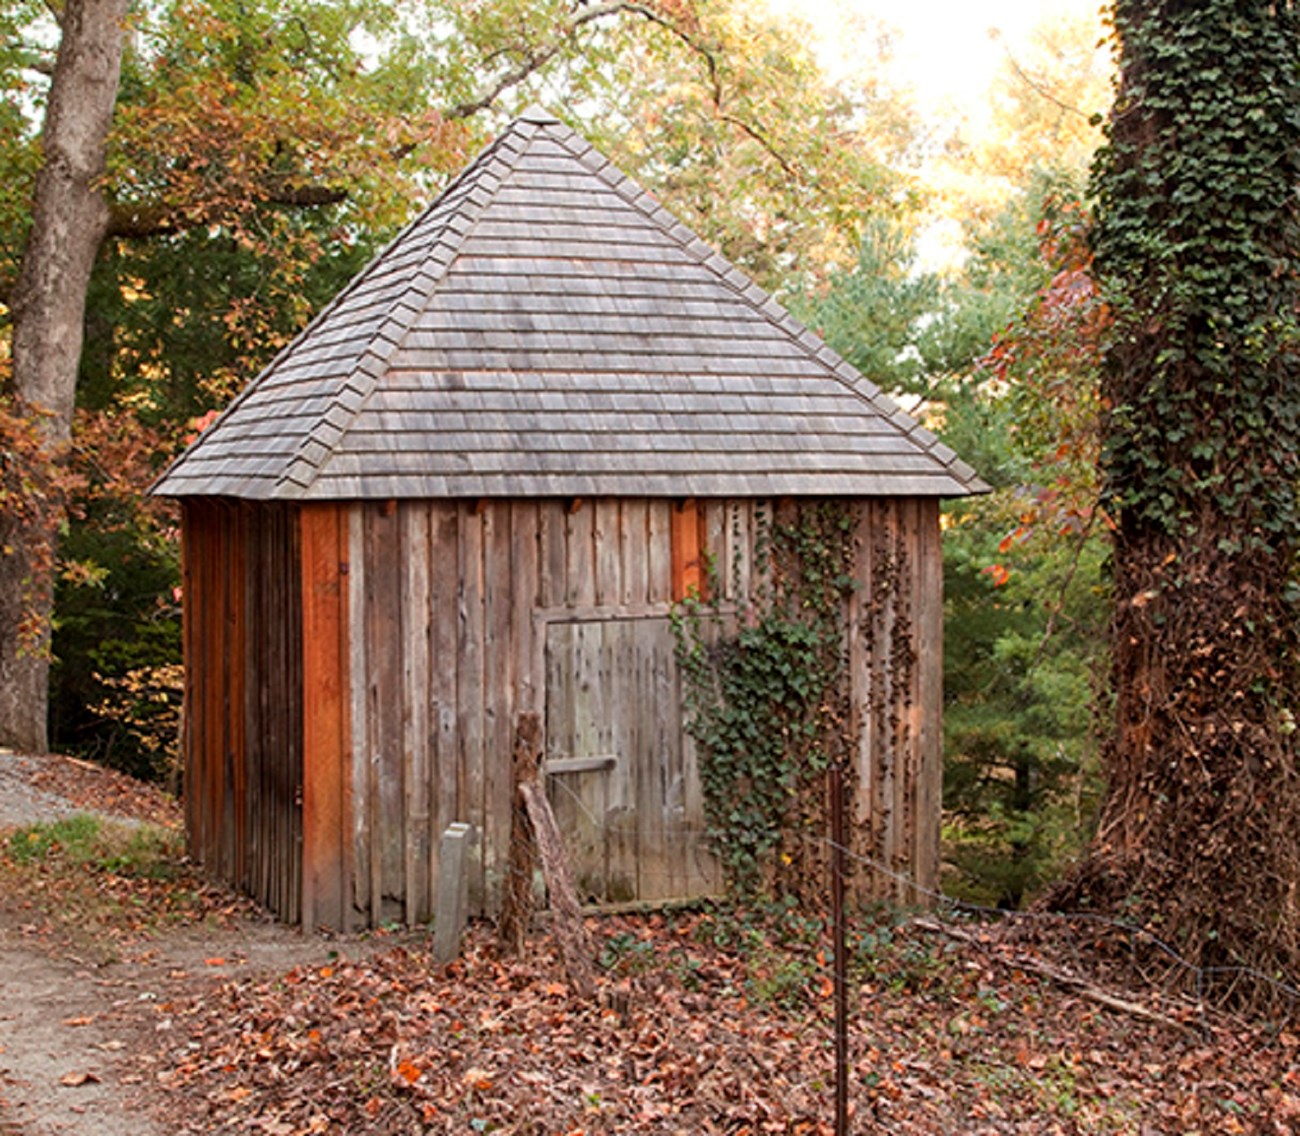 A small wooden shed with a wooden door and wood shingles sits at the edge of a wooded area.